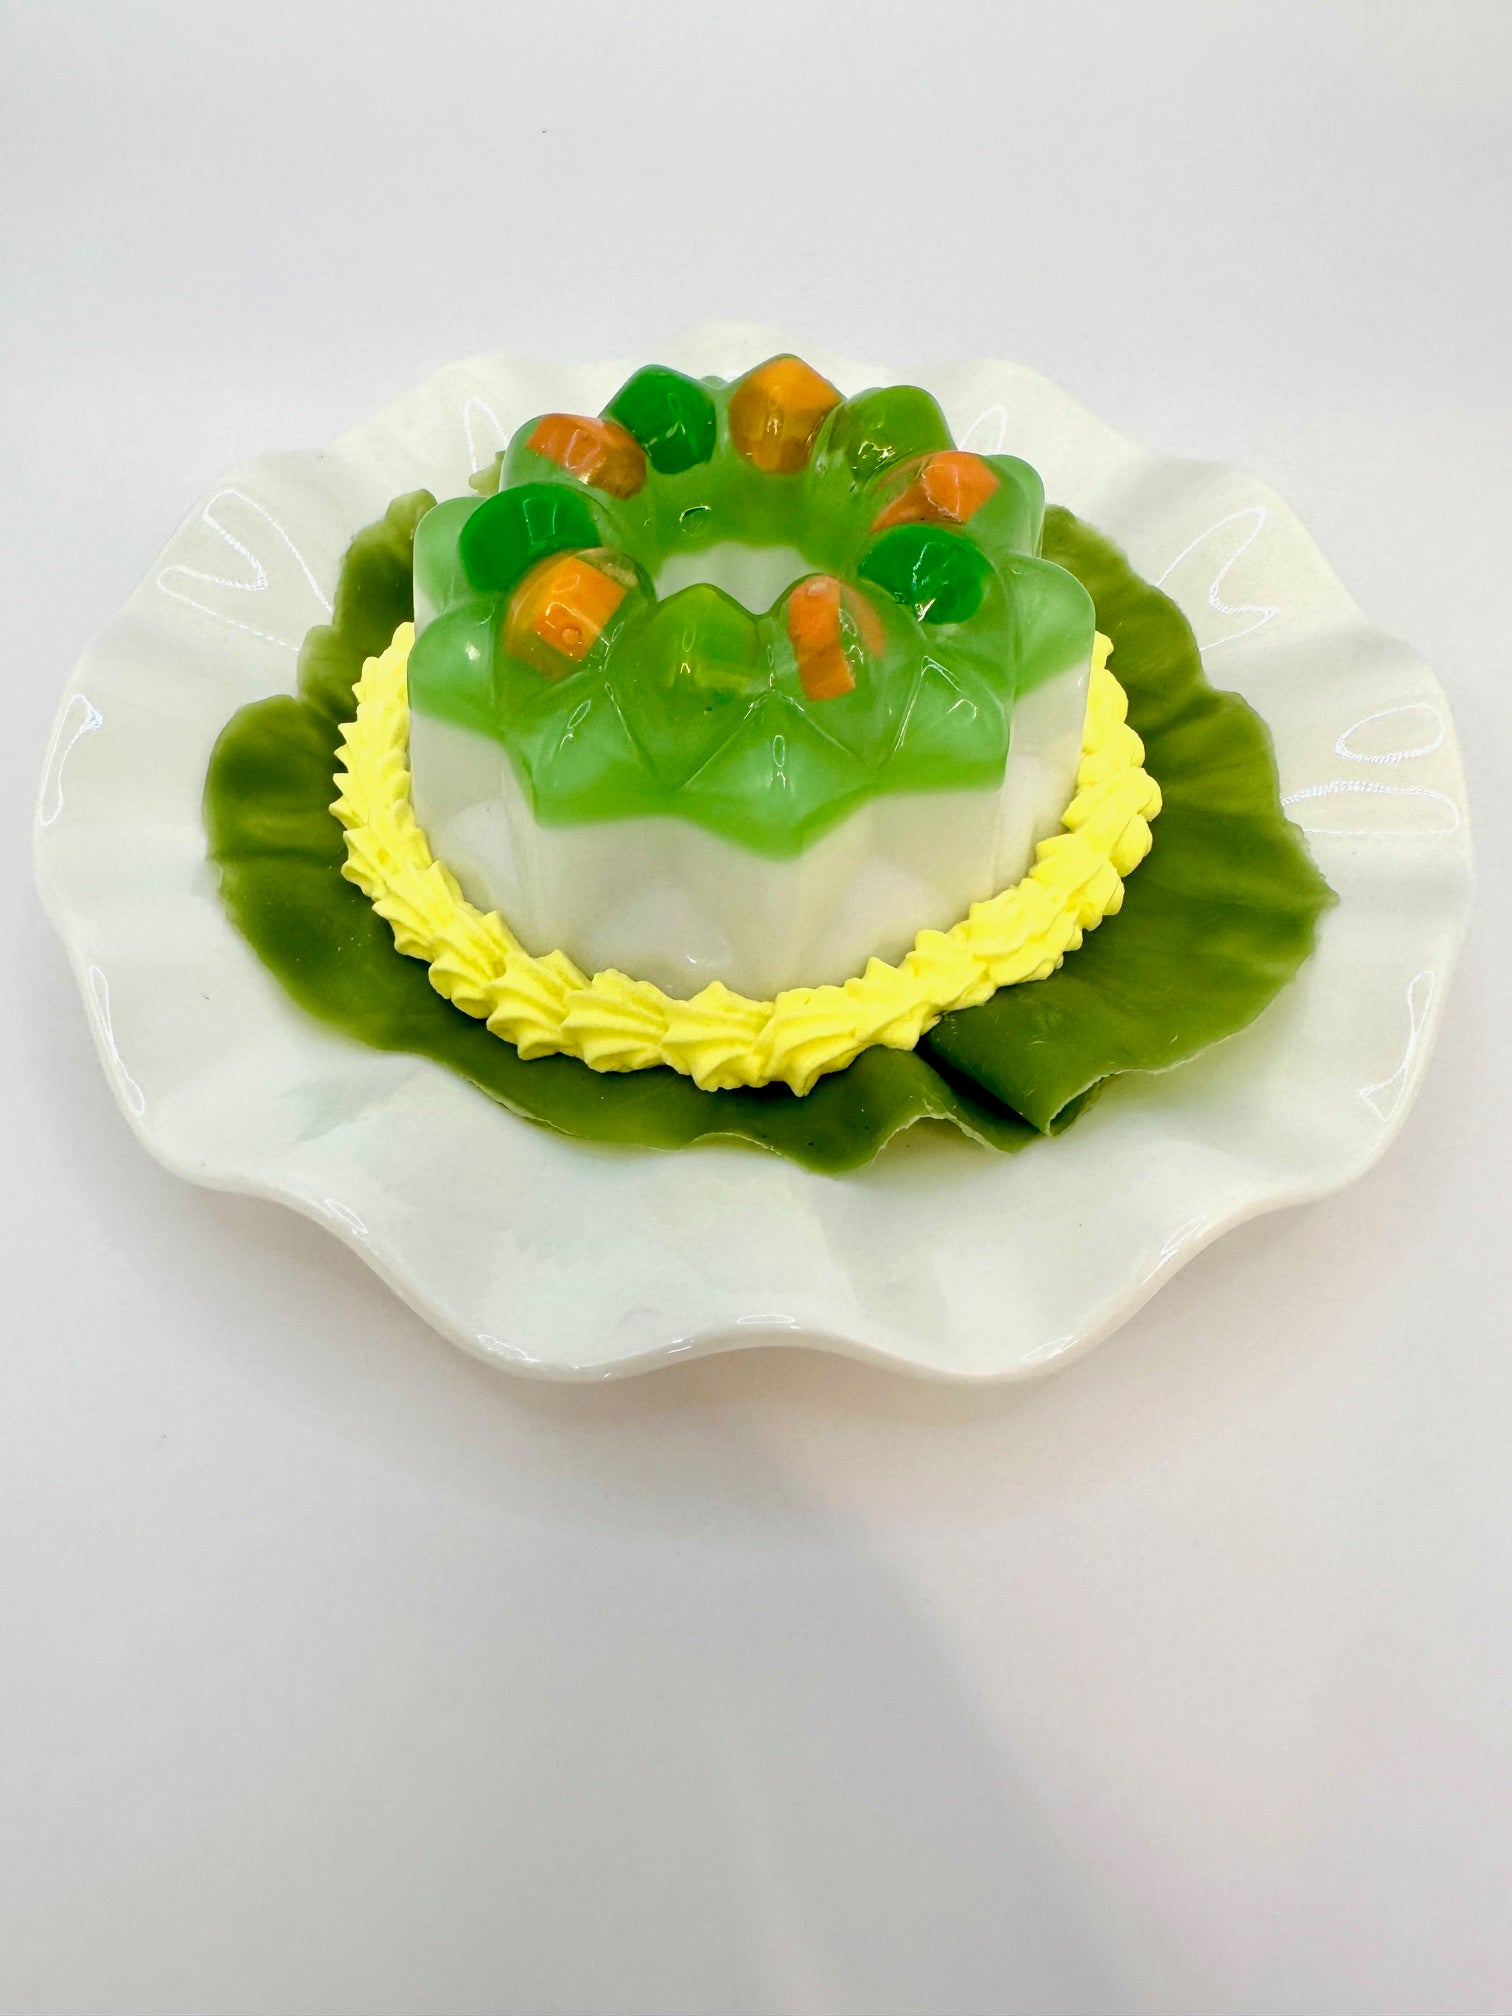 Small Peas and Carrots Jello in Vintage Plate and plastic lettuce